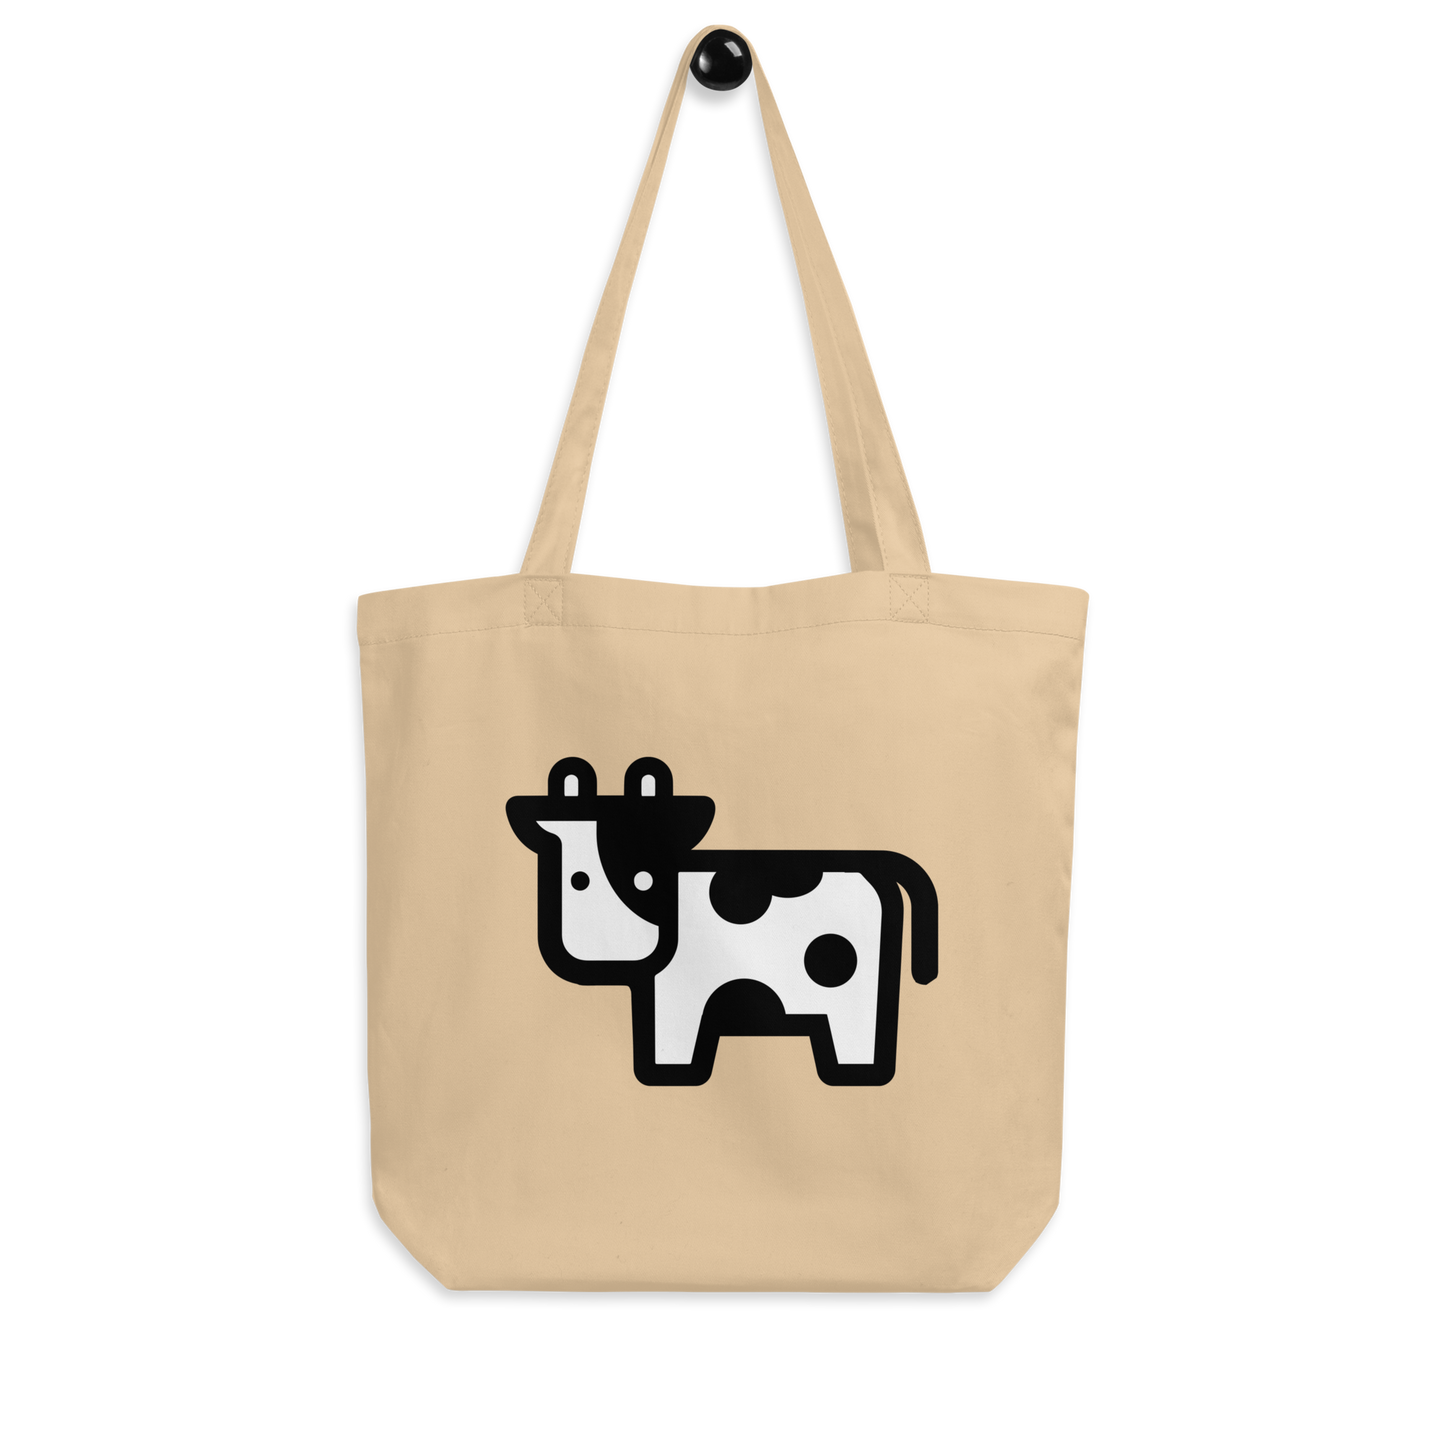 The Beefy Cow Tote Bag